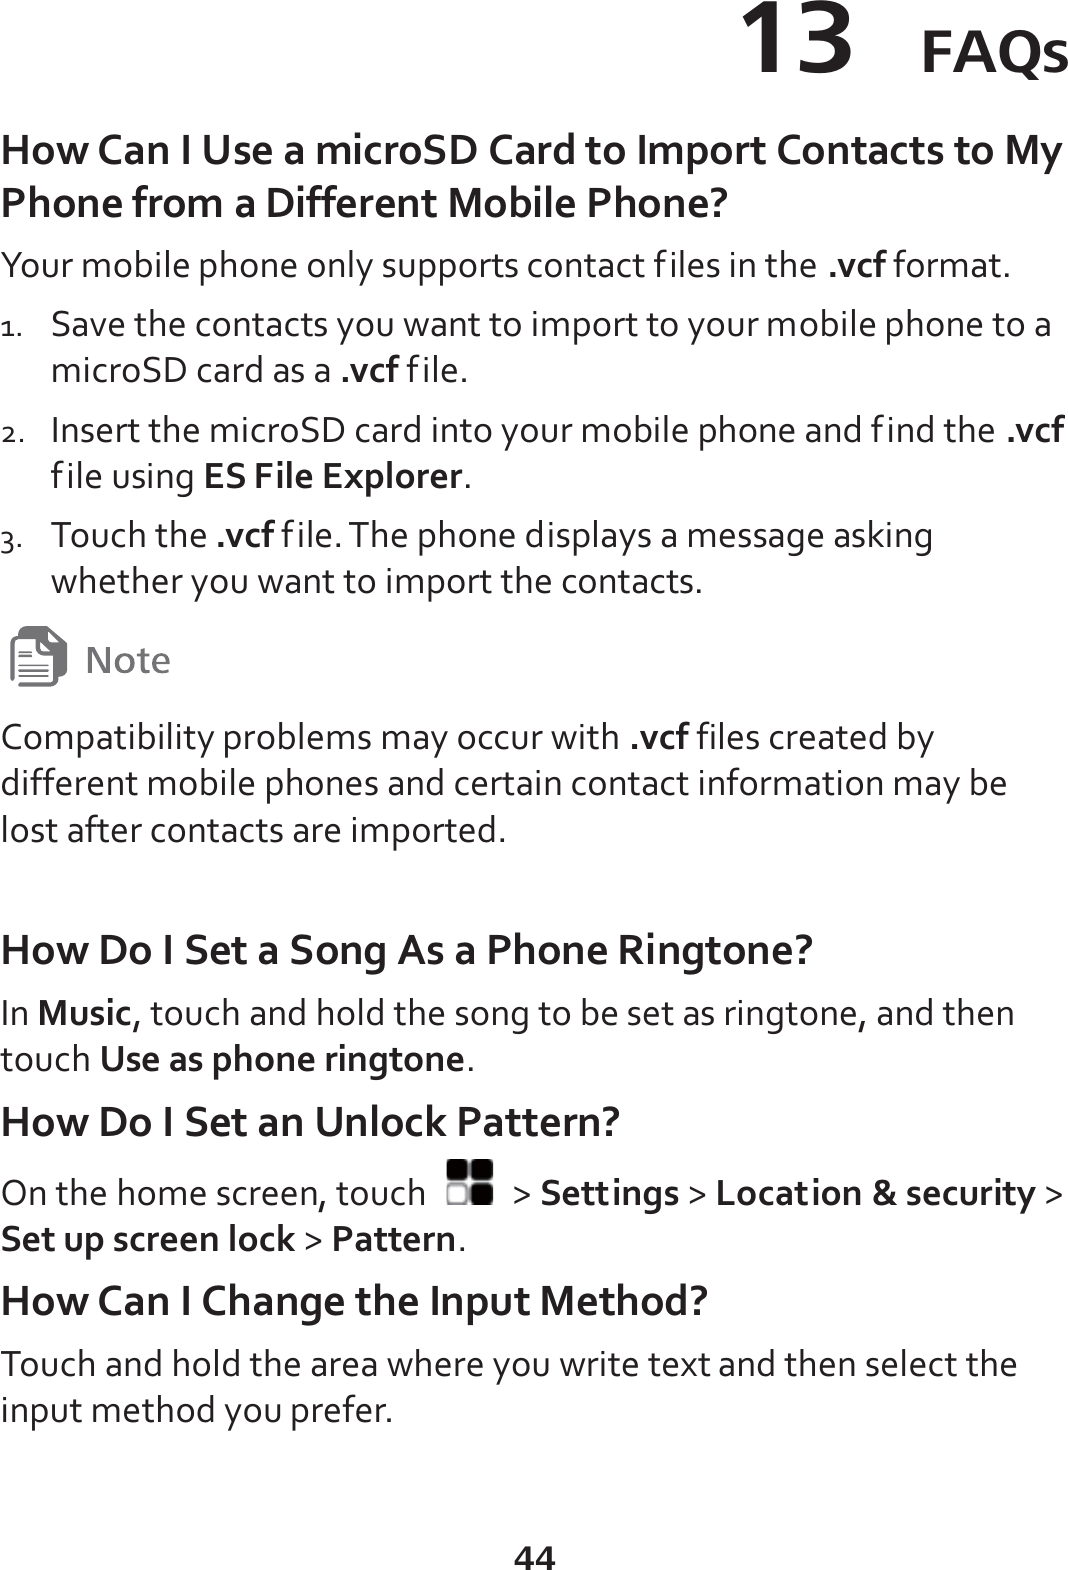 44 13  FAQs How Can I Use a microSD Card to Import Contacts to My Phone from a Different Mobile Phone? Your mobile phone only supports contact files in the .vcf format. 1. Save the contacts you want to import to your mobile phone to a microSD card as a .vcf file. 2. Insert the microSD card into your mobile phone and find the .vcf file using ES File Explorer. 3. Touch the .vcf file. The phone displays a message asking whether you want to import the contacts.  Compatibility problems may occur with .vcf files created by different mobile phones and certain contact information may be lost after contacts are imported.    How Do I Set a Song As a Phone Ringtone? In Music, touch and hold the song to be set as ringtone, and then touch Use as phone ringtone. How Do I Set an Unlock Pattern? On the home screen, touch   &gt; Settings &gt; Location &amp; security &gt; Set up screen lock &gt; Pattern. How Can I Change the Input Method? Touch and hold the area where you write text and then select the input method you prefer. 